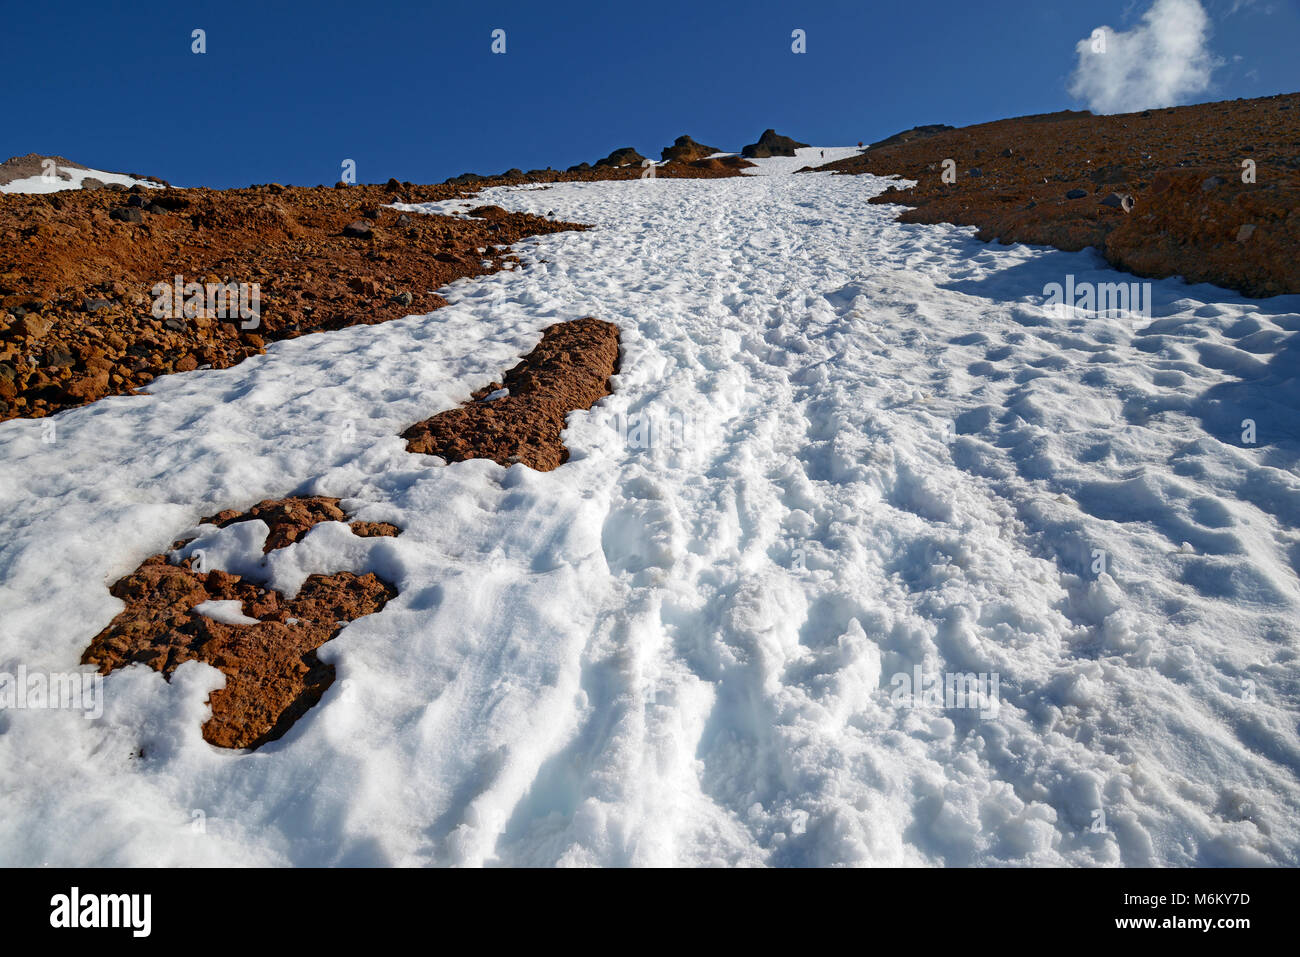 Climbing terrain on Mount Shasta volcano, California 14er in the Cascade Range where glaciers, avalanches and steep snow are risks mountaineers conten Stock Photo